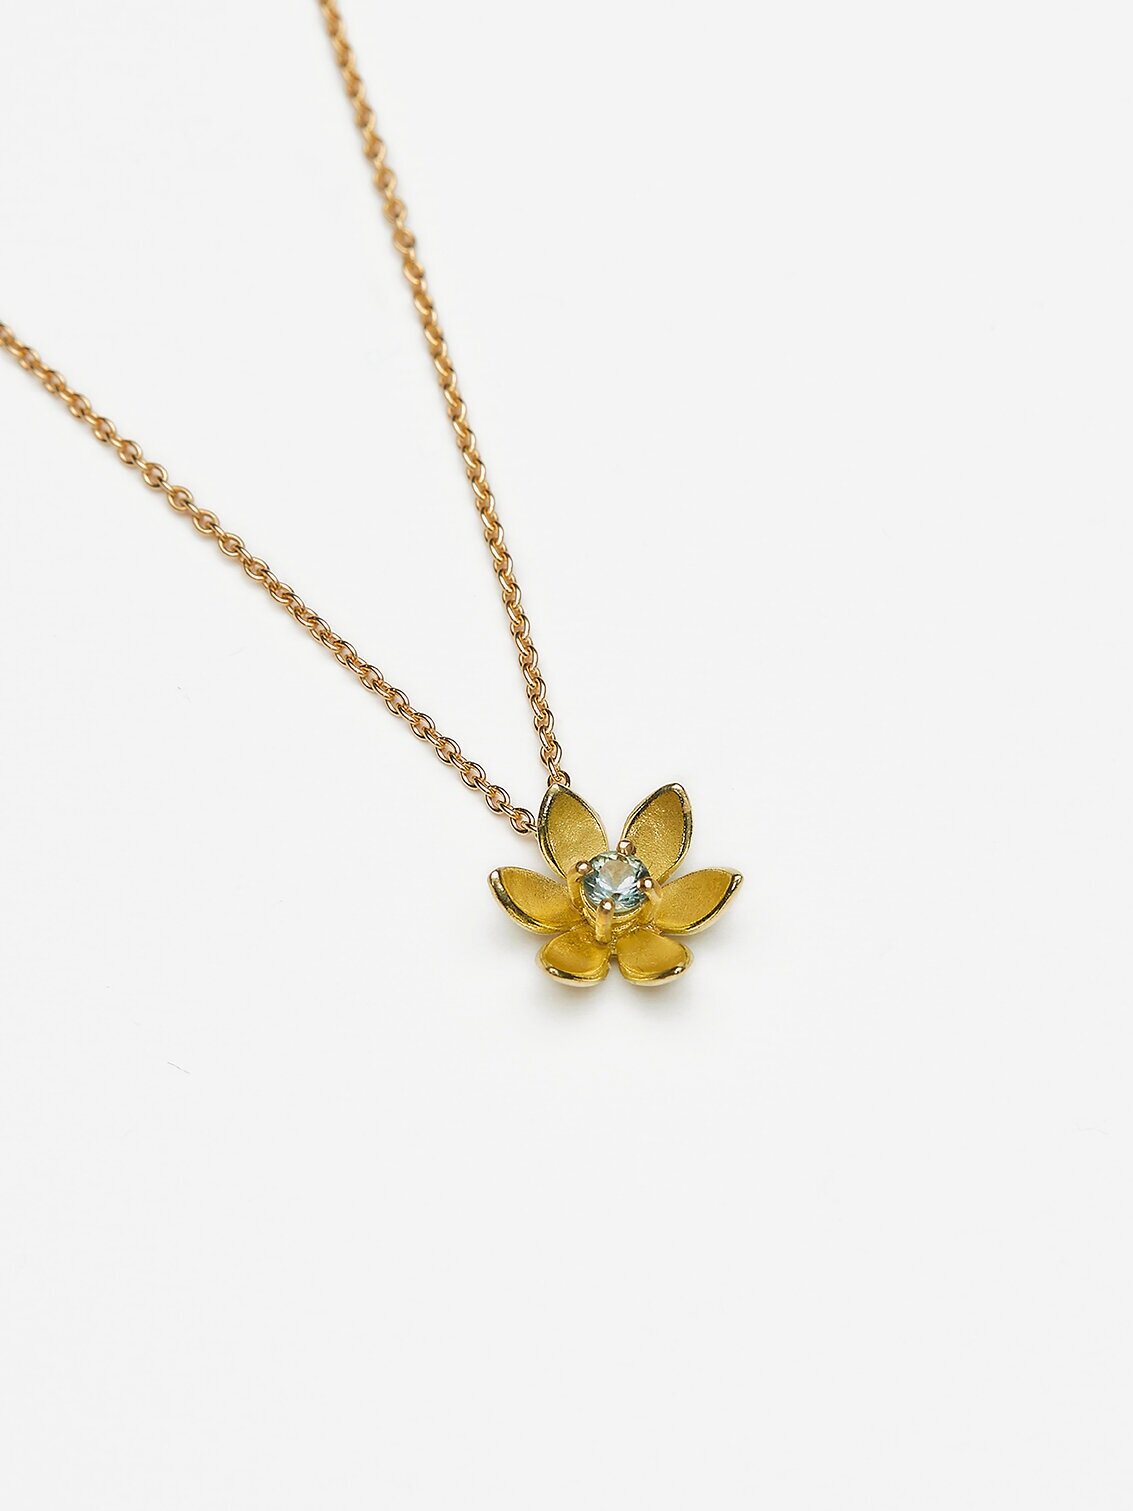 Buy Gold Toned Welsh Daffodil Flower Pendant Necklace Online in India - Etsy